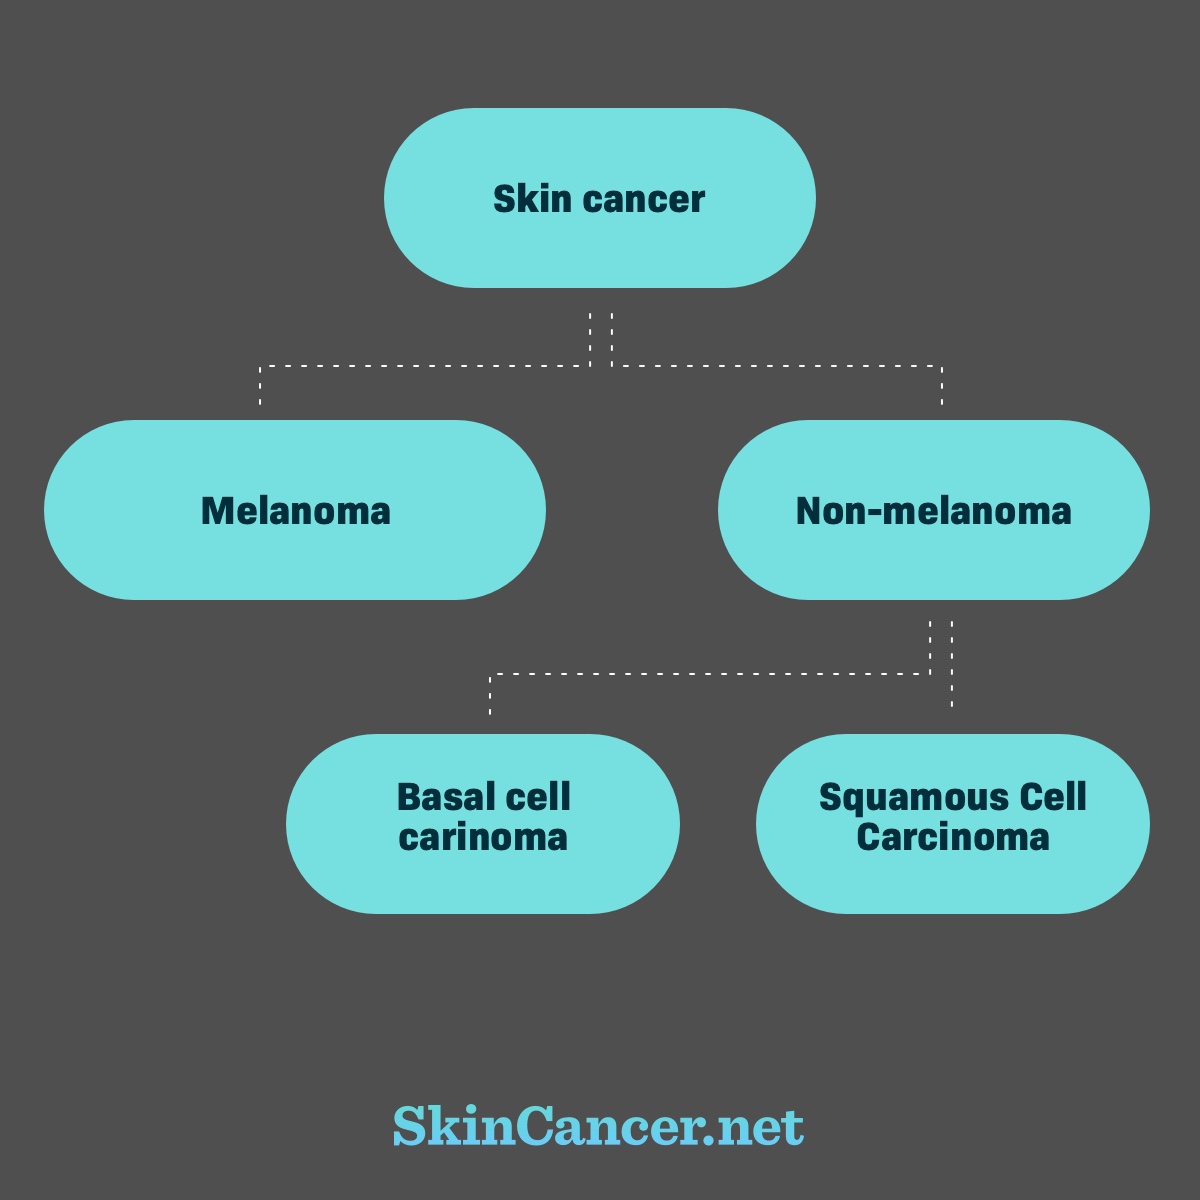 Chart showing melanoma and non-melanoma as branches of skin cancer, with squamous cell and basal cell under non-melanoma